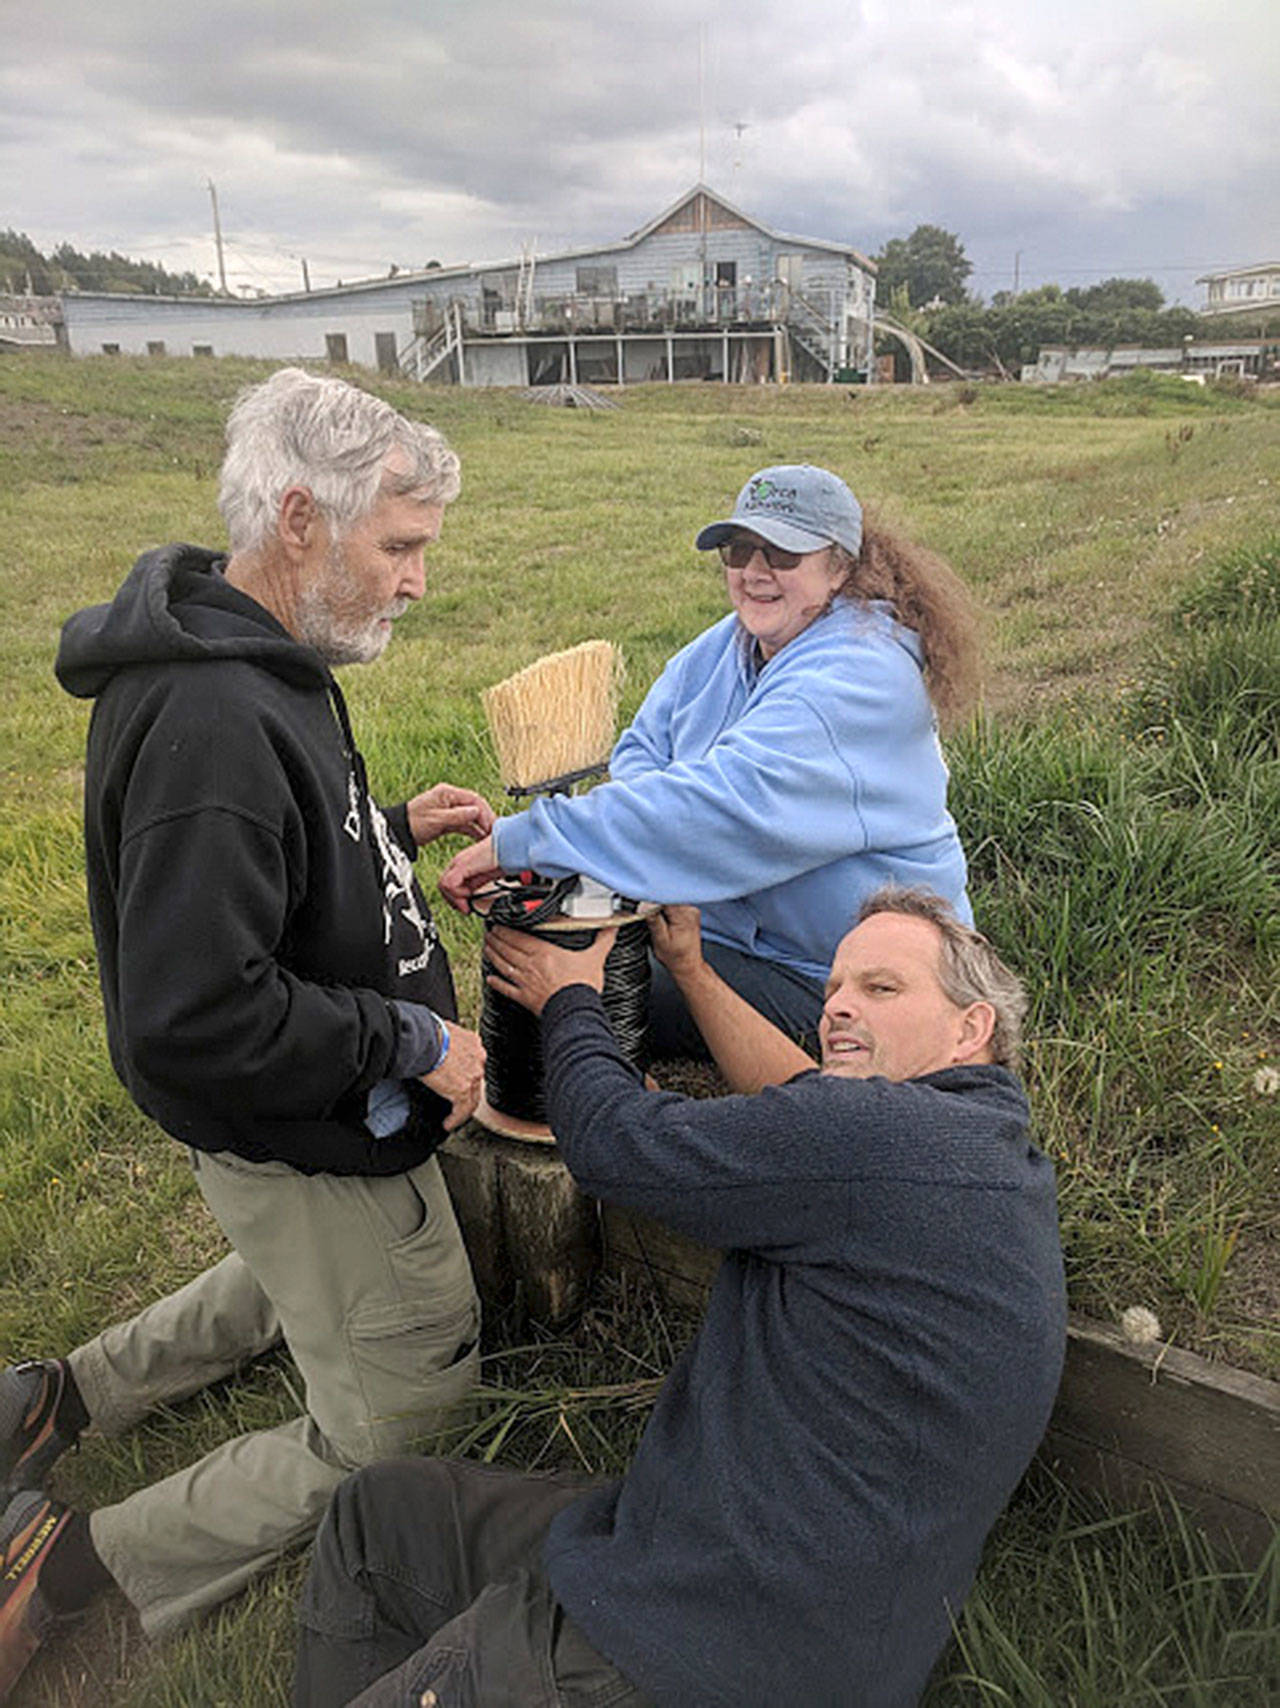 Courtesy photo                                Howard Garrett, left, Susan Berta and Florian Graner roll out the long cable needed to install a hydrophone to listen to marine life. The research sound equipment is located at Bush Point in the sound path of killer whales and other marine mammals. (Photo provided)